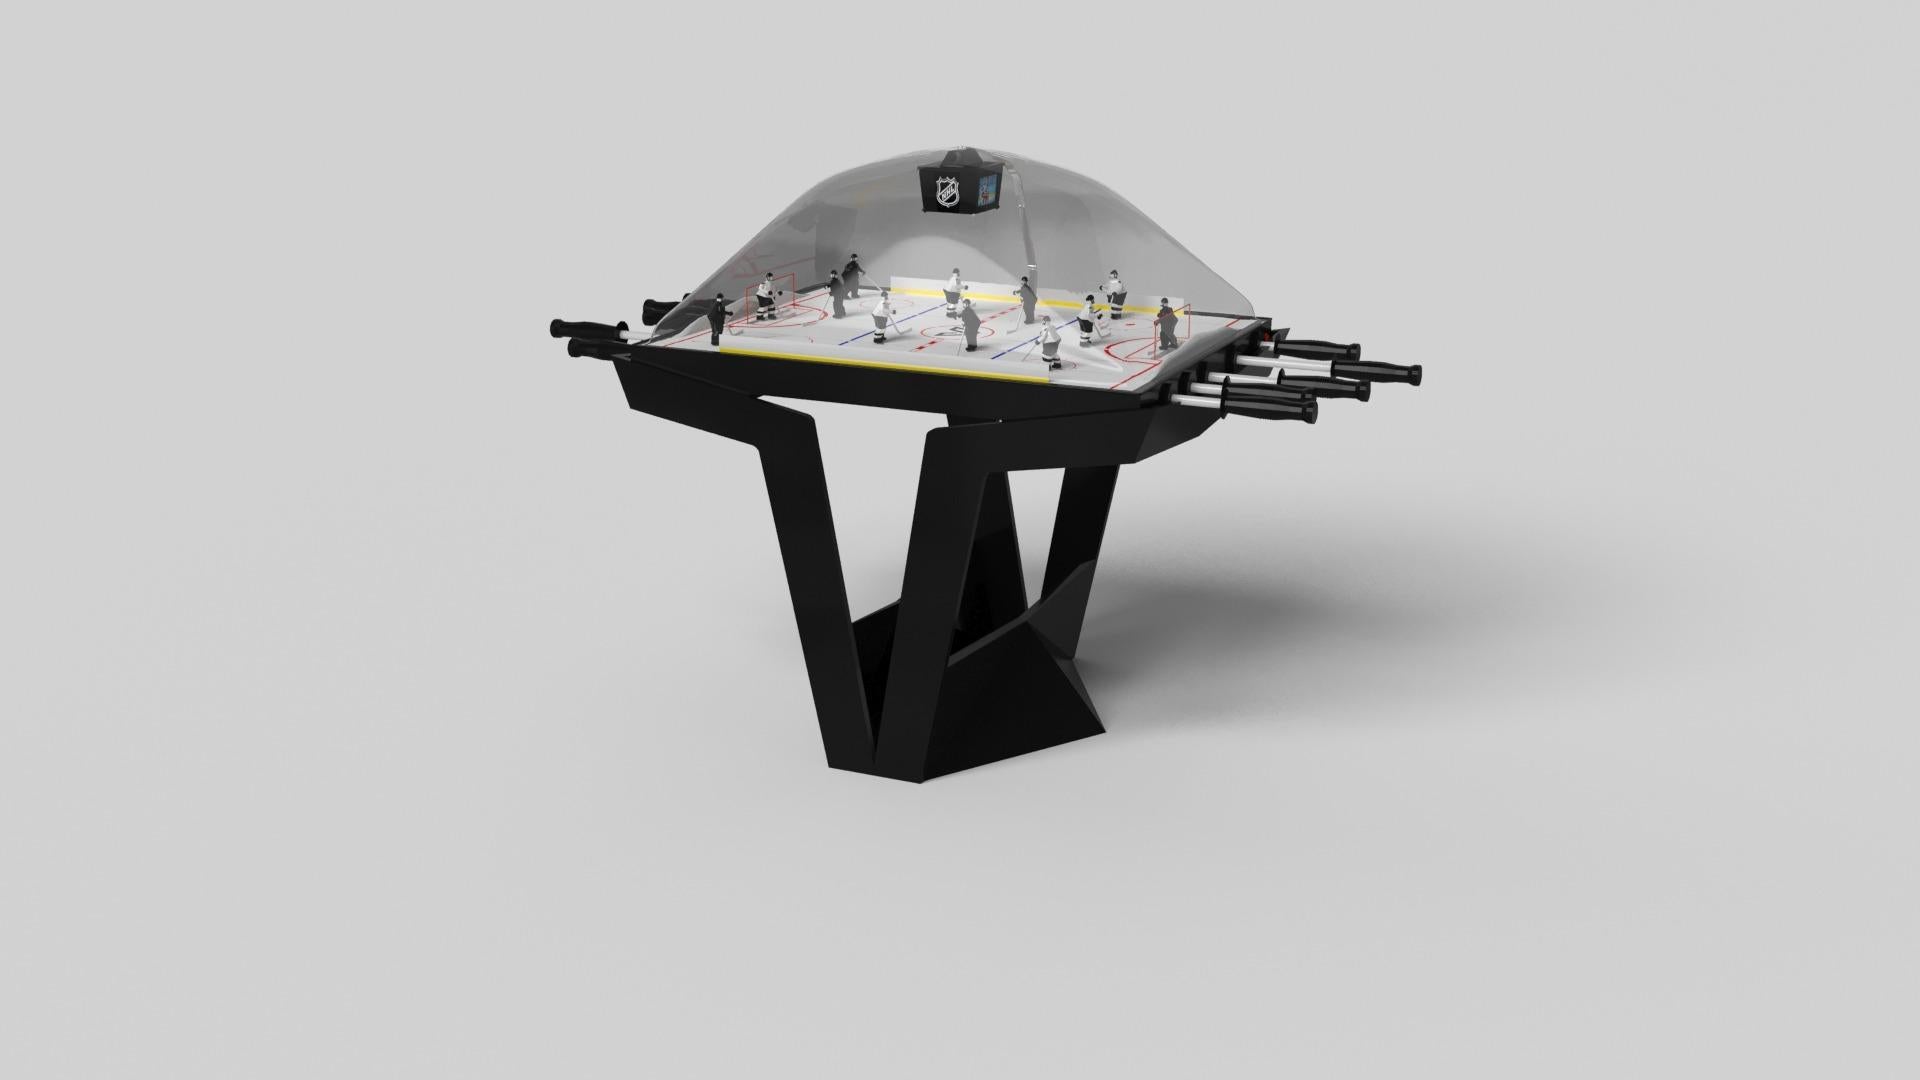 The Enzo dome hockey table is Inspired by the aerodynamic angles of top-of-the-line European vehicles. Designed with sleek, V-shaped lines and a thoughtful use of negative space, this table boasts an energetic sense of spirit while epitomizing the